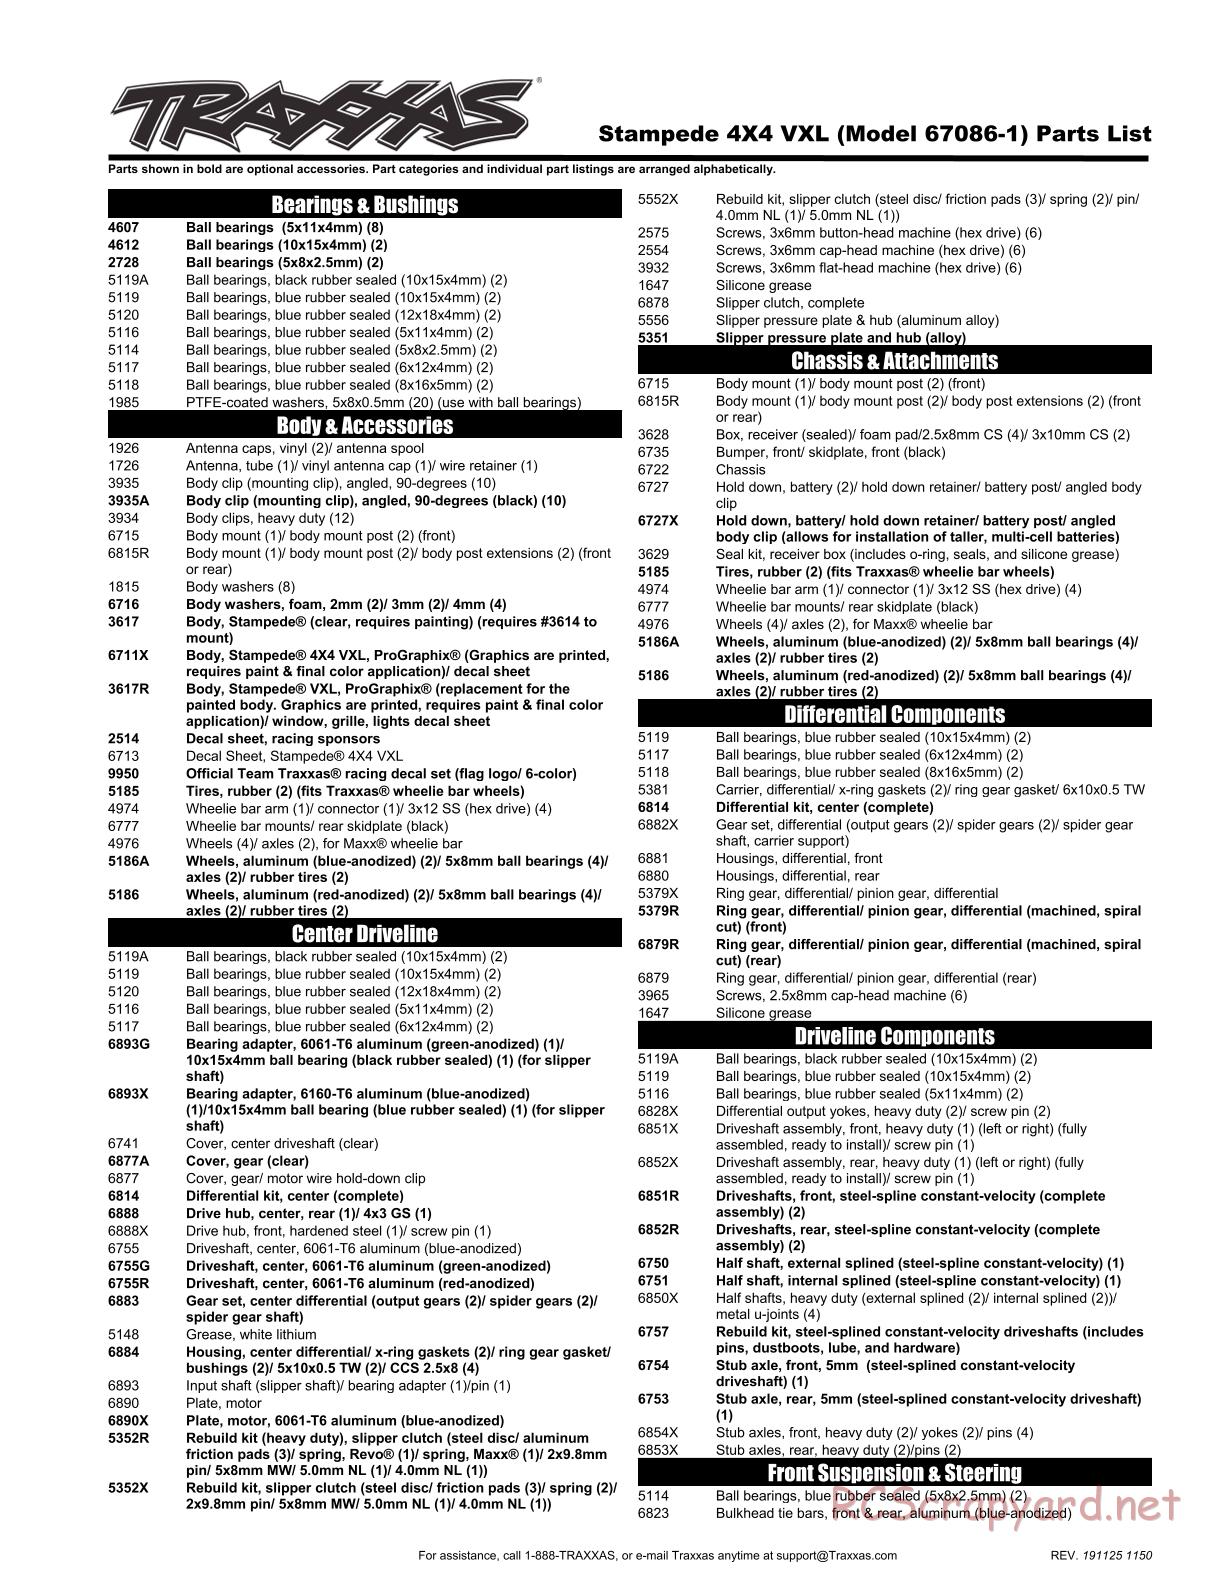 Traxxas - Stampede 4x4 VXL (2015) - Parts List - Page 1